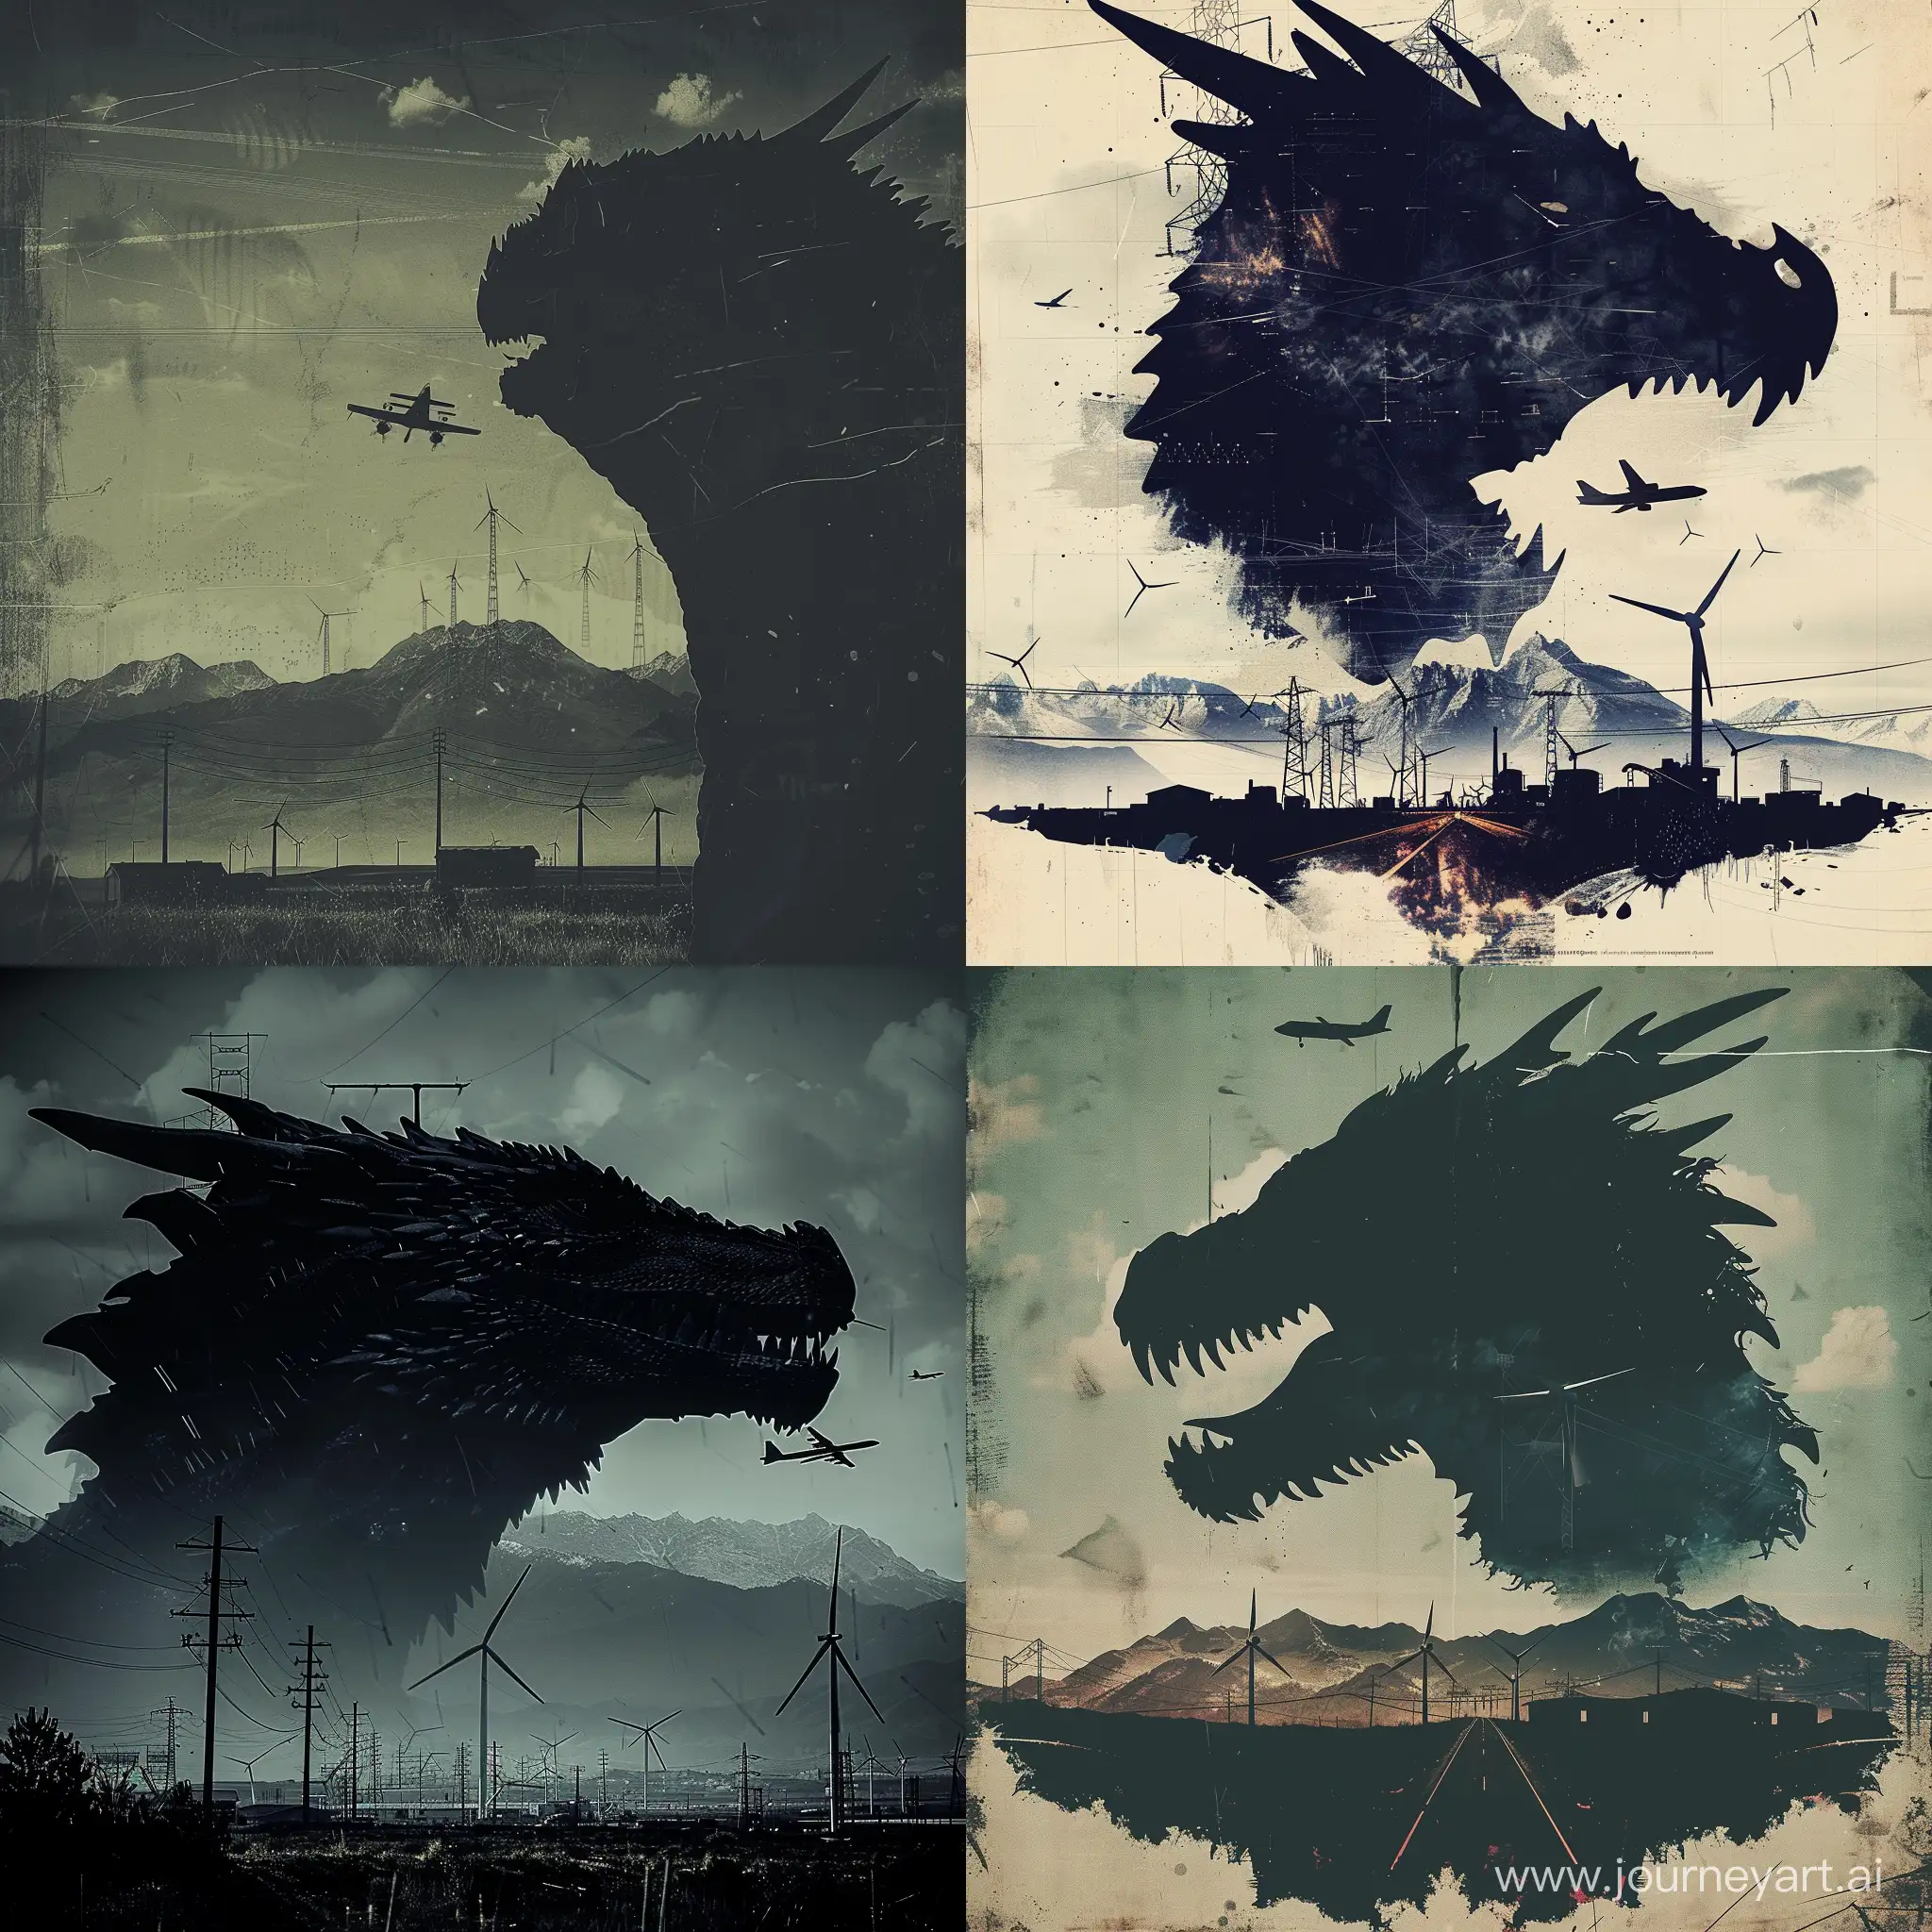 Omenous dark image of a dragon head, wind turbines, power lines, aircraft and mountains in the background